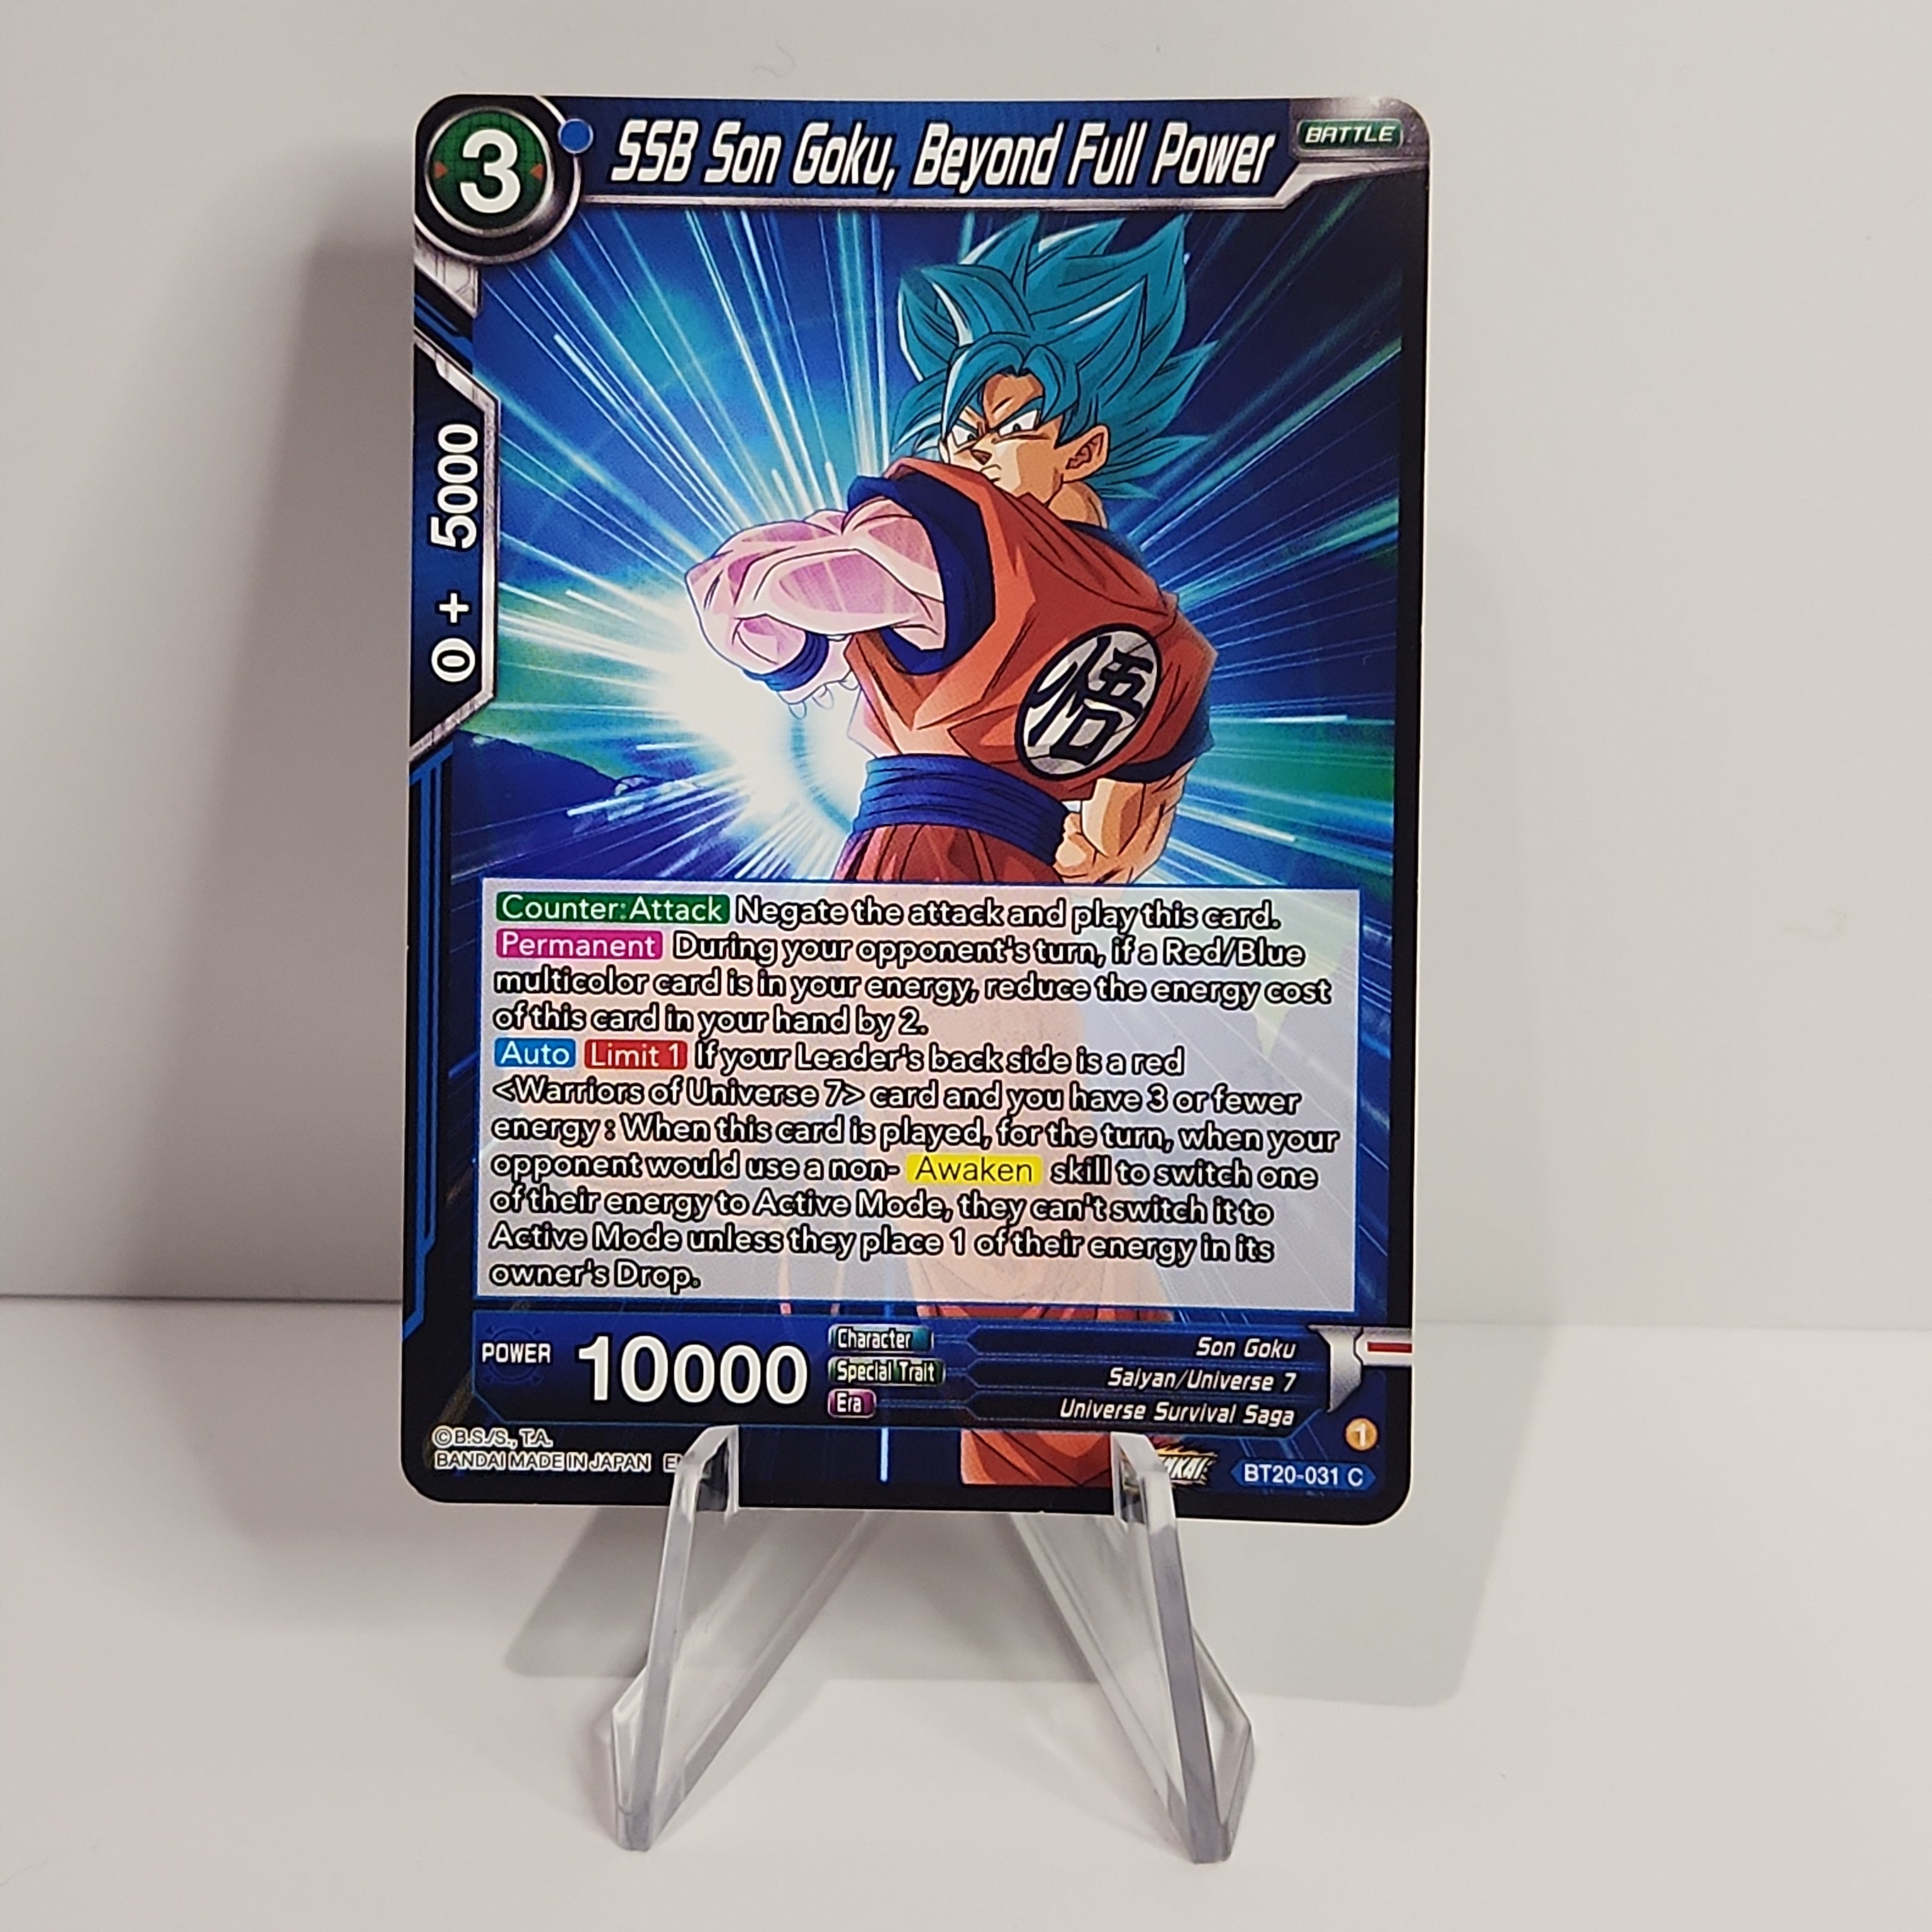 SSB Son Goku, Beyond Full Power - Power Absorbed (DBS-B20) - Premium Ginger from 1of1 Collectables - Just $2! Shop now at 1of1 Collectables